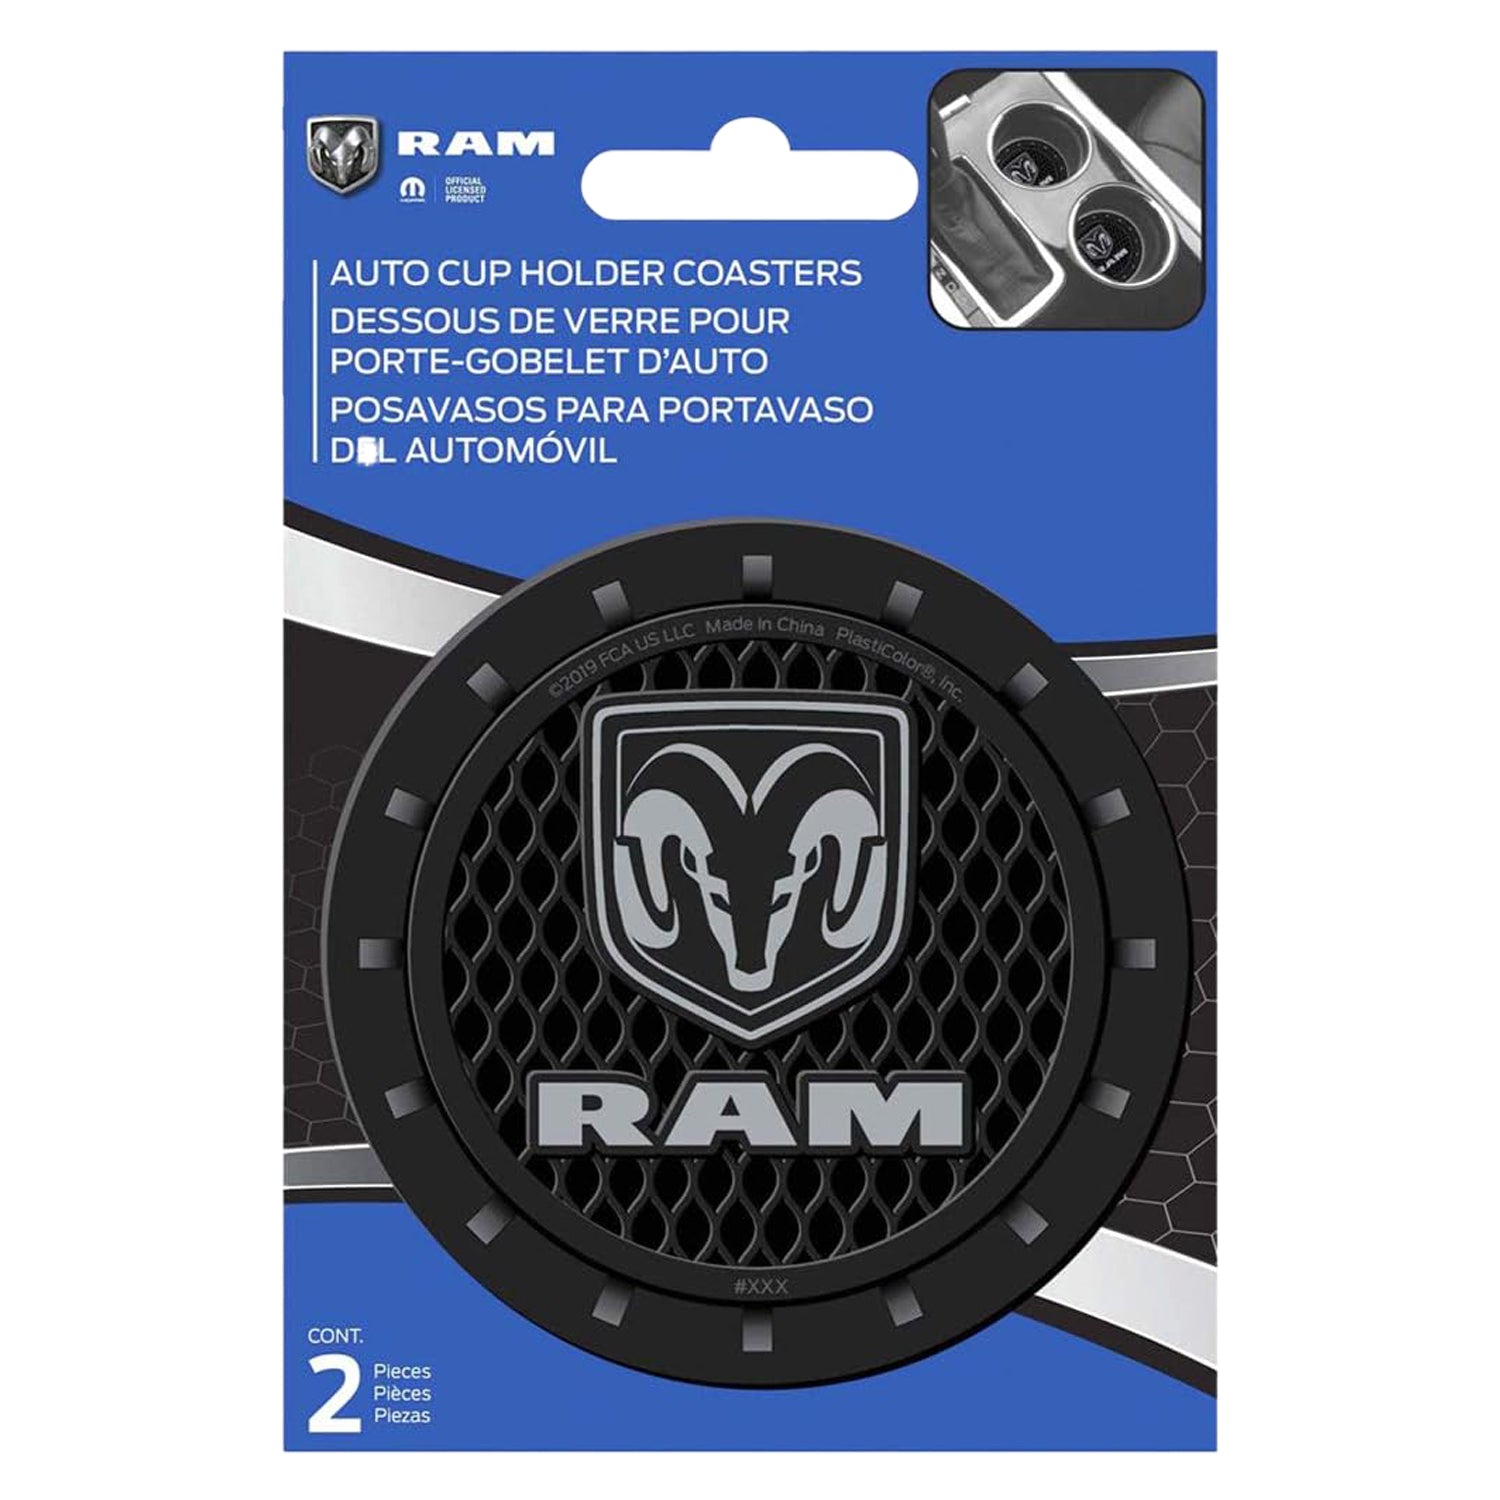 RAM Car Cup Coasters 2-Piece - Cute Coasters for Your Car Cup Holders,  Must-Have Accessories for Your Car Interior by GOSO Direct